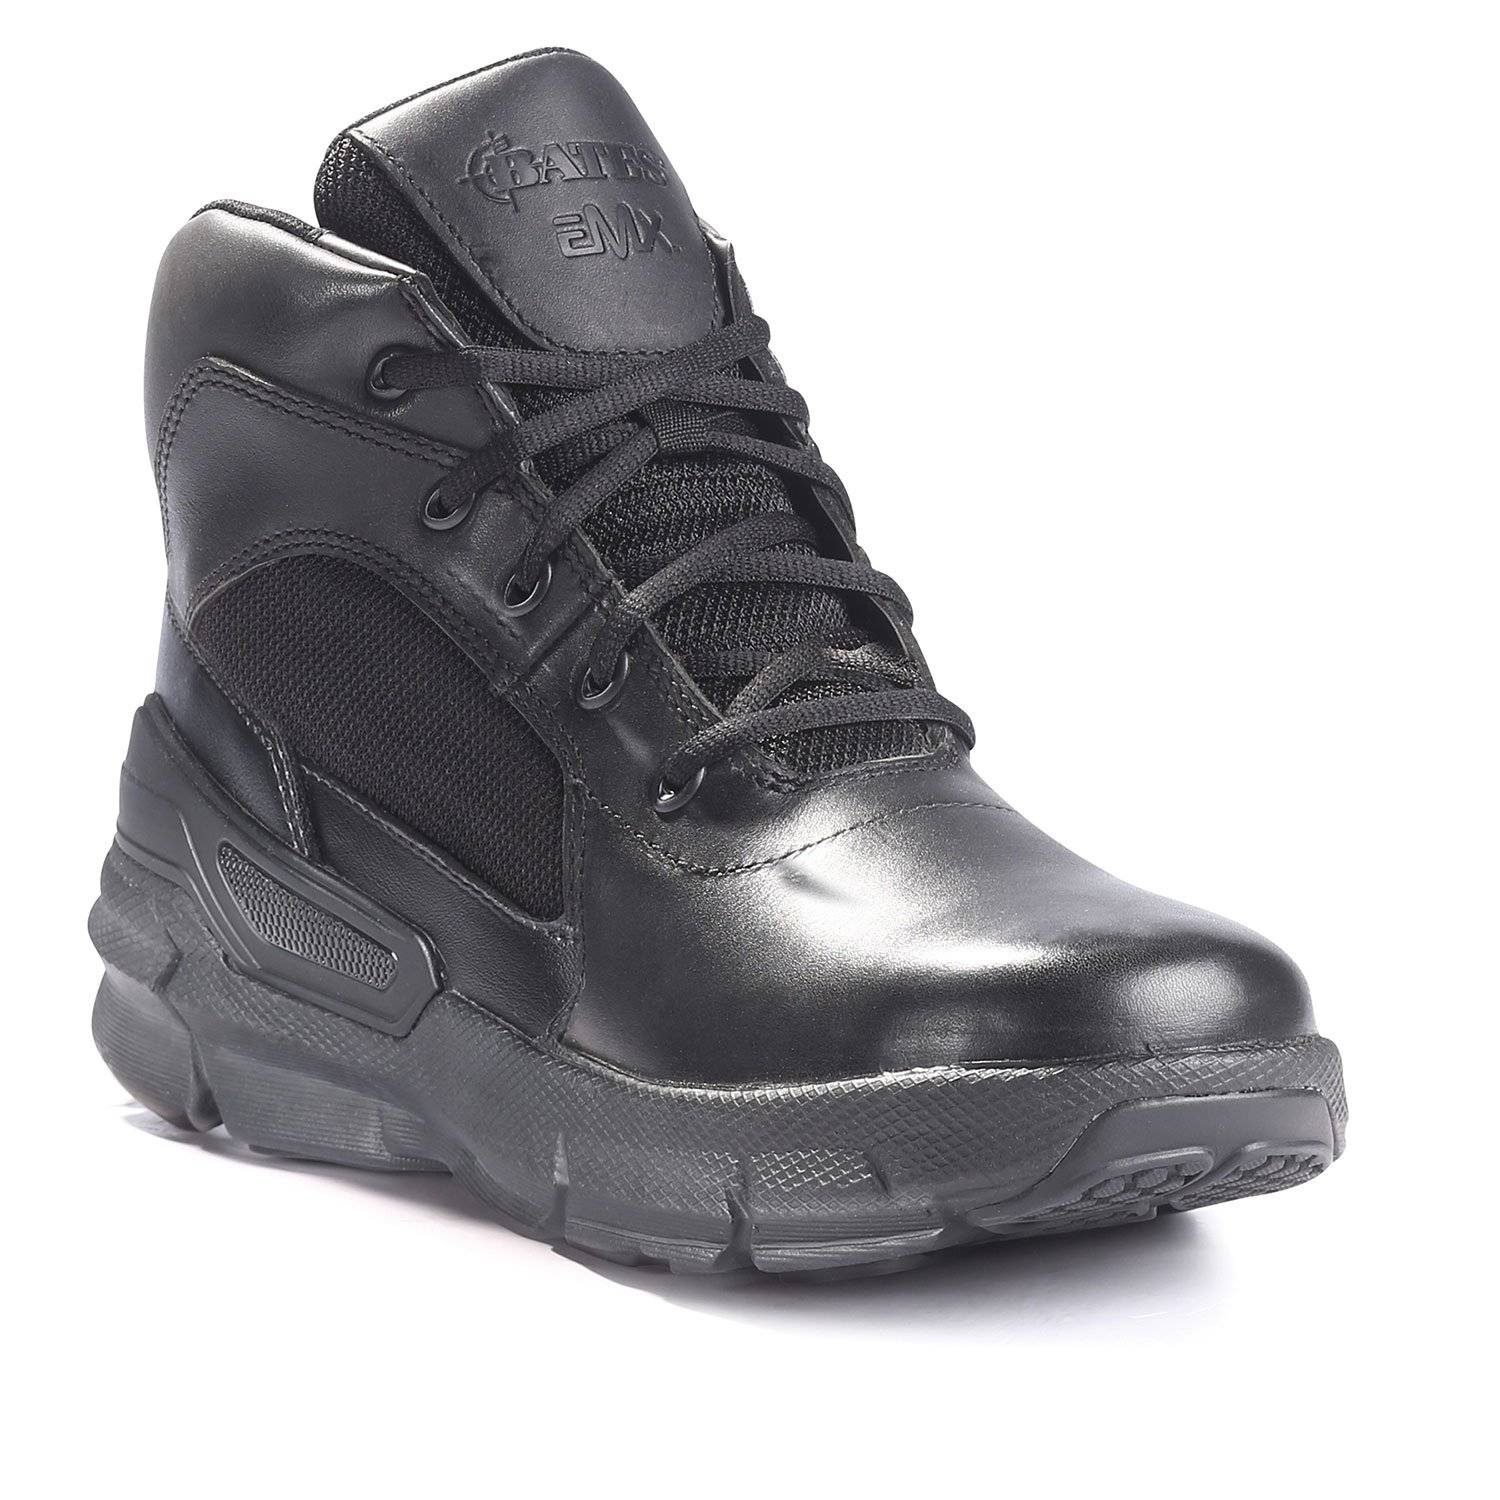 Bates Charge 6" Boot with EMX Technology